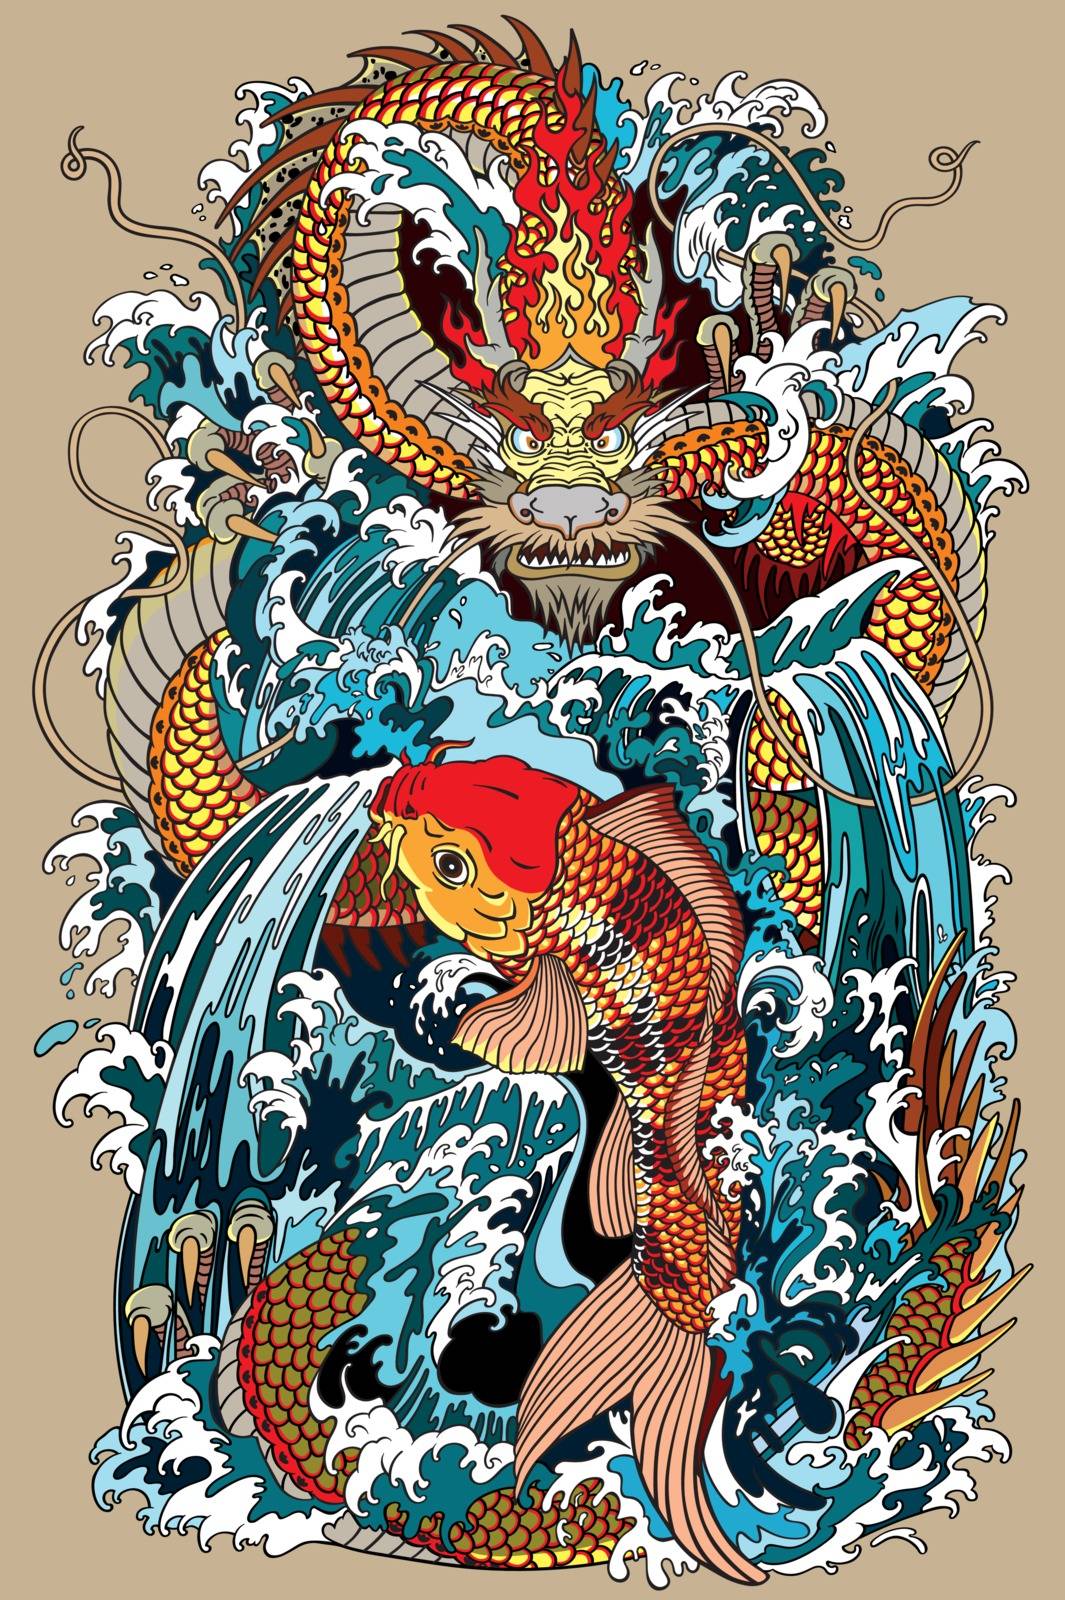 golden dragon and koi carp fish which is trying to reach the top of the waterfall. Tattoo style vector illustration according to ancient Chinese and Japanese myth